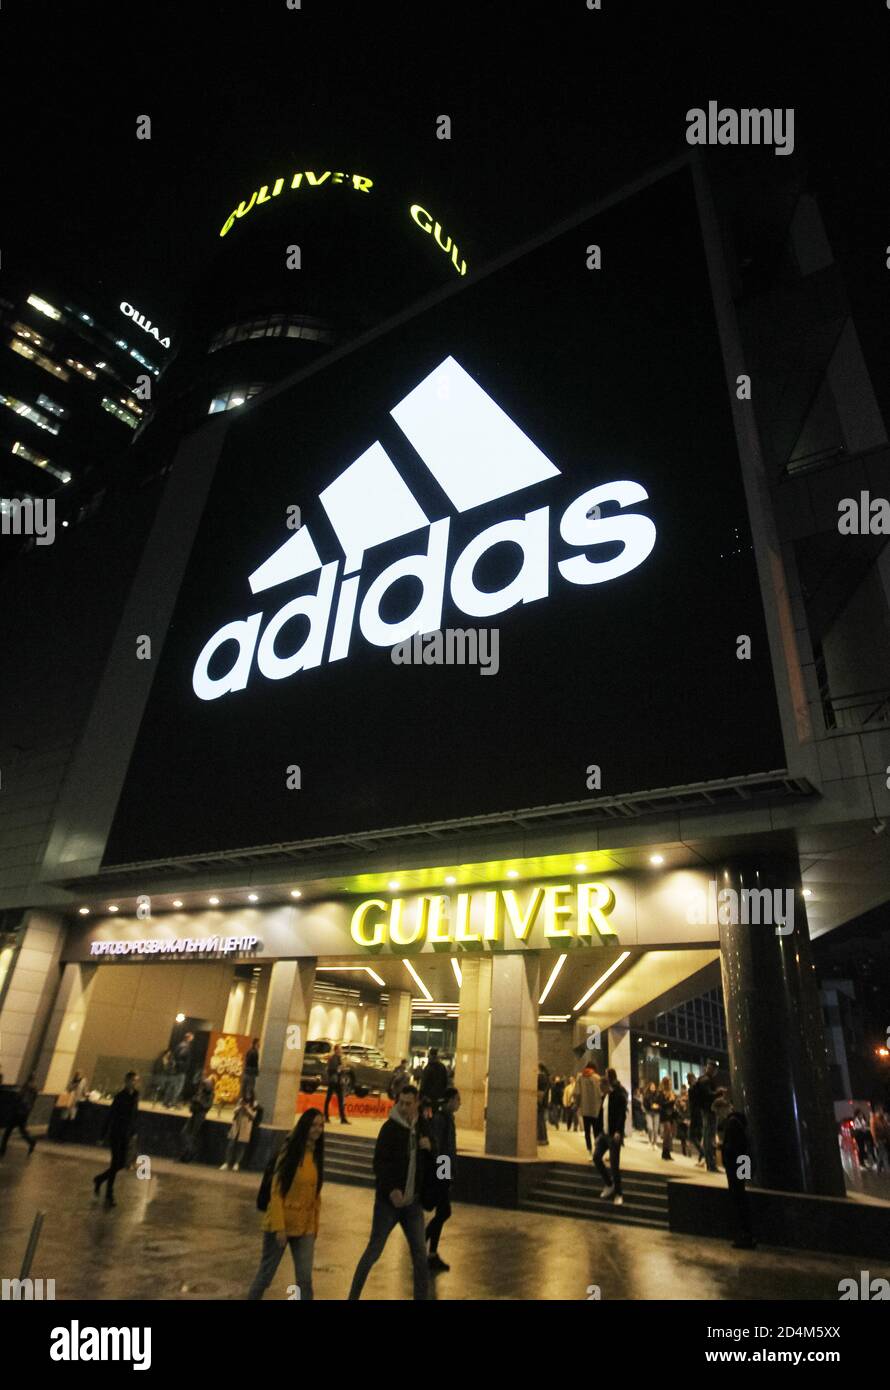 Kiev, Ukraine. 8th Oct, 2020. A huge screen shows the logo Adidas on a  shopping mall building in downtown Kiev. Credit: Pavlo Gonchar/SOPA  Images/ZUMA Wire/Alamy Live News Stock Photo - Alamy